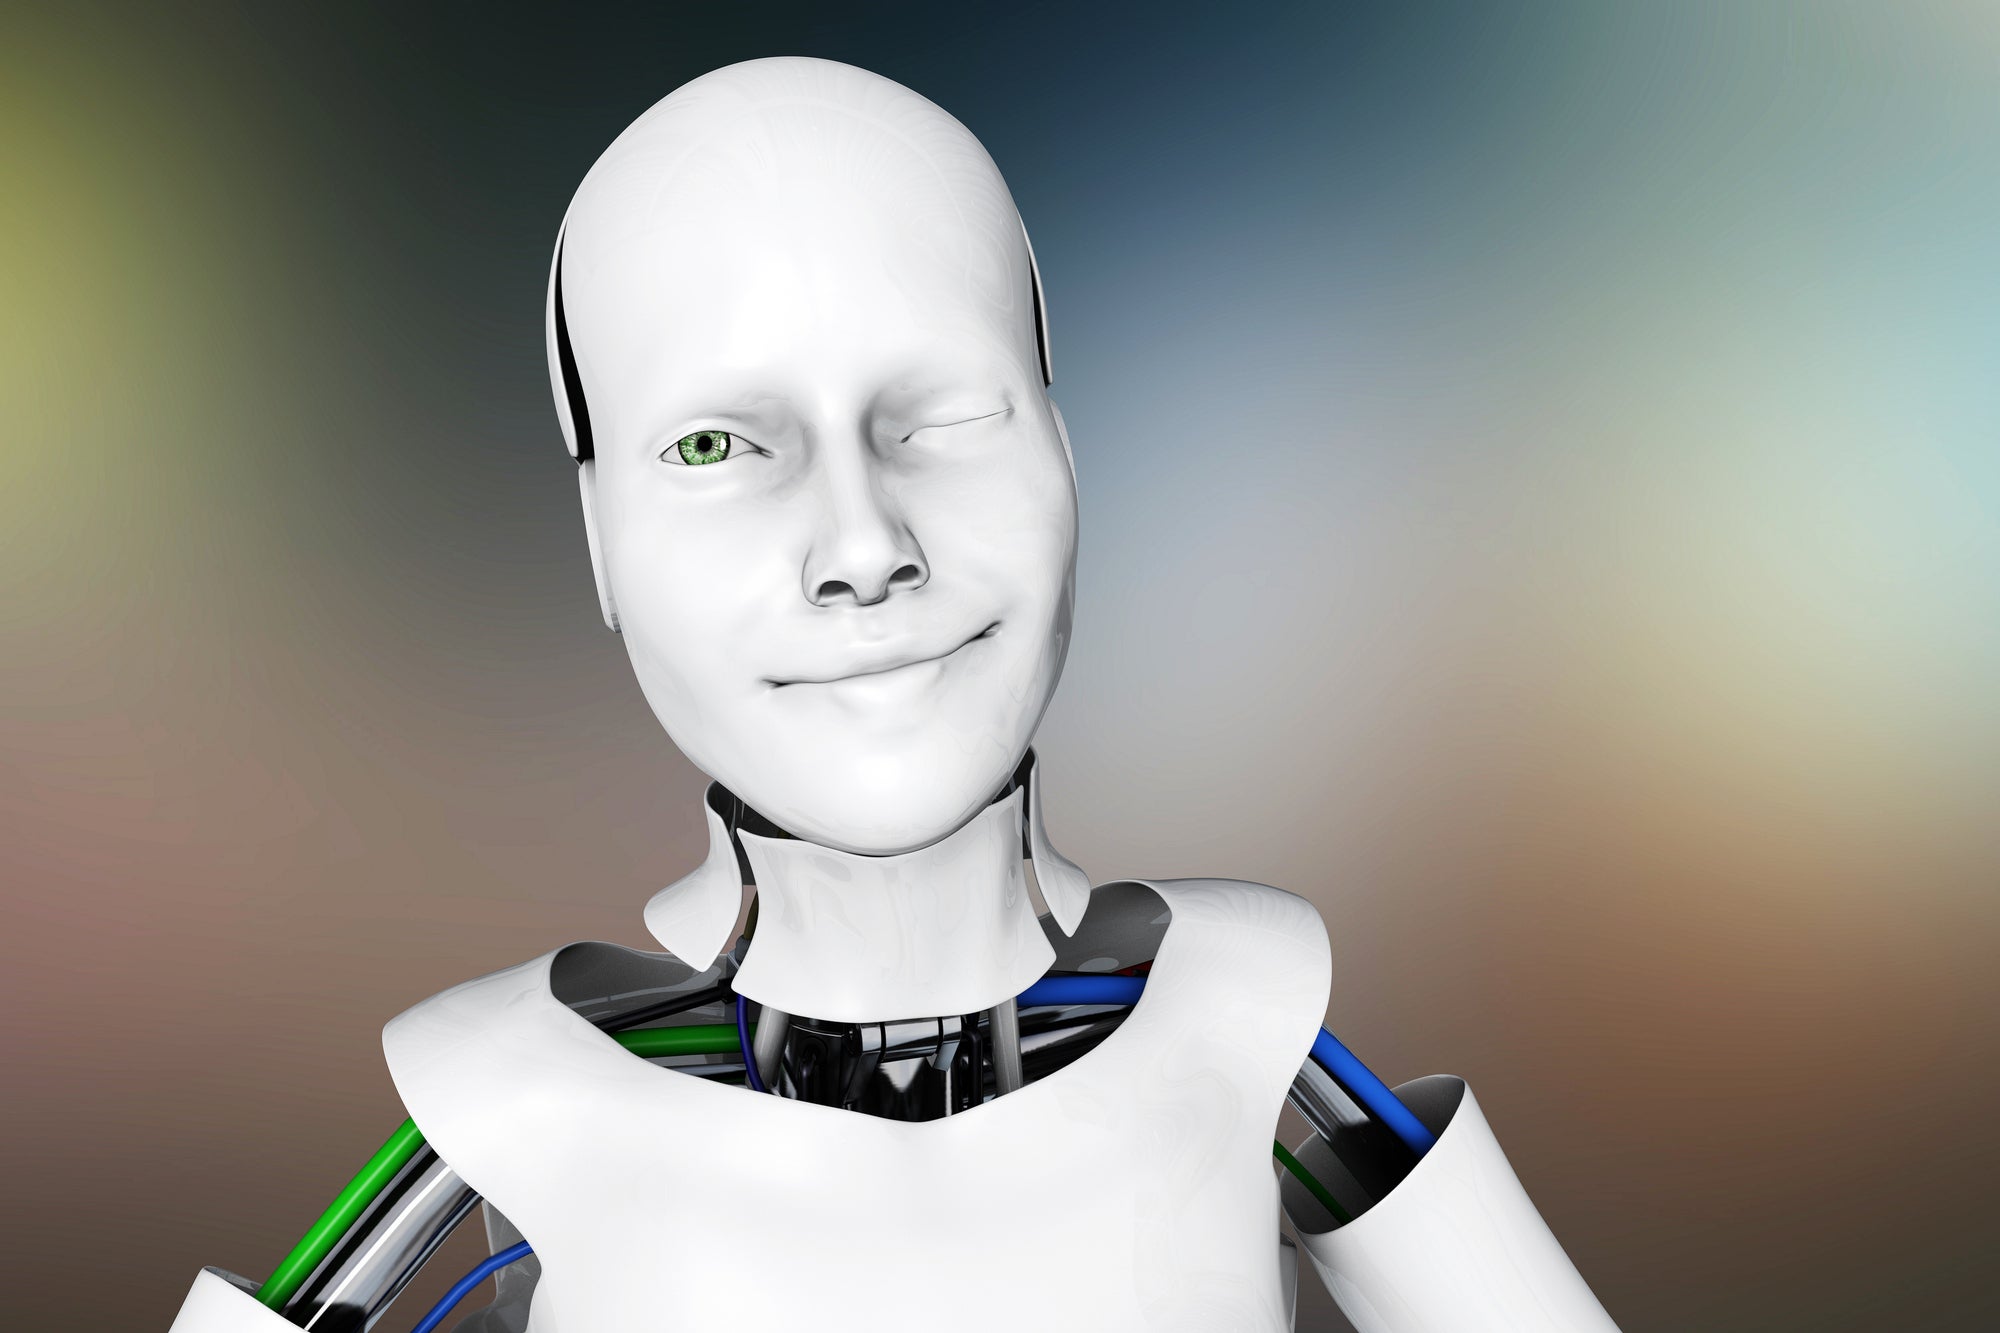 A winking robot. Chatbots that imitate humans a little too well are creepy.